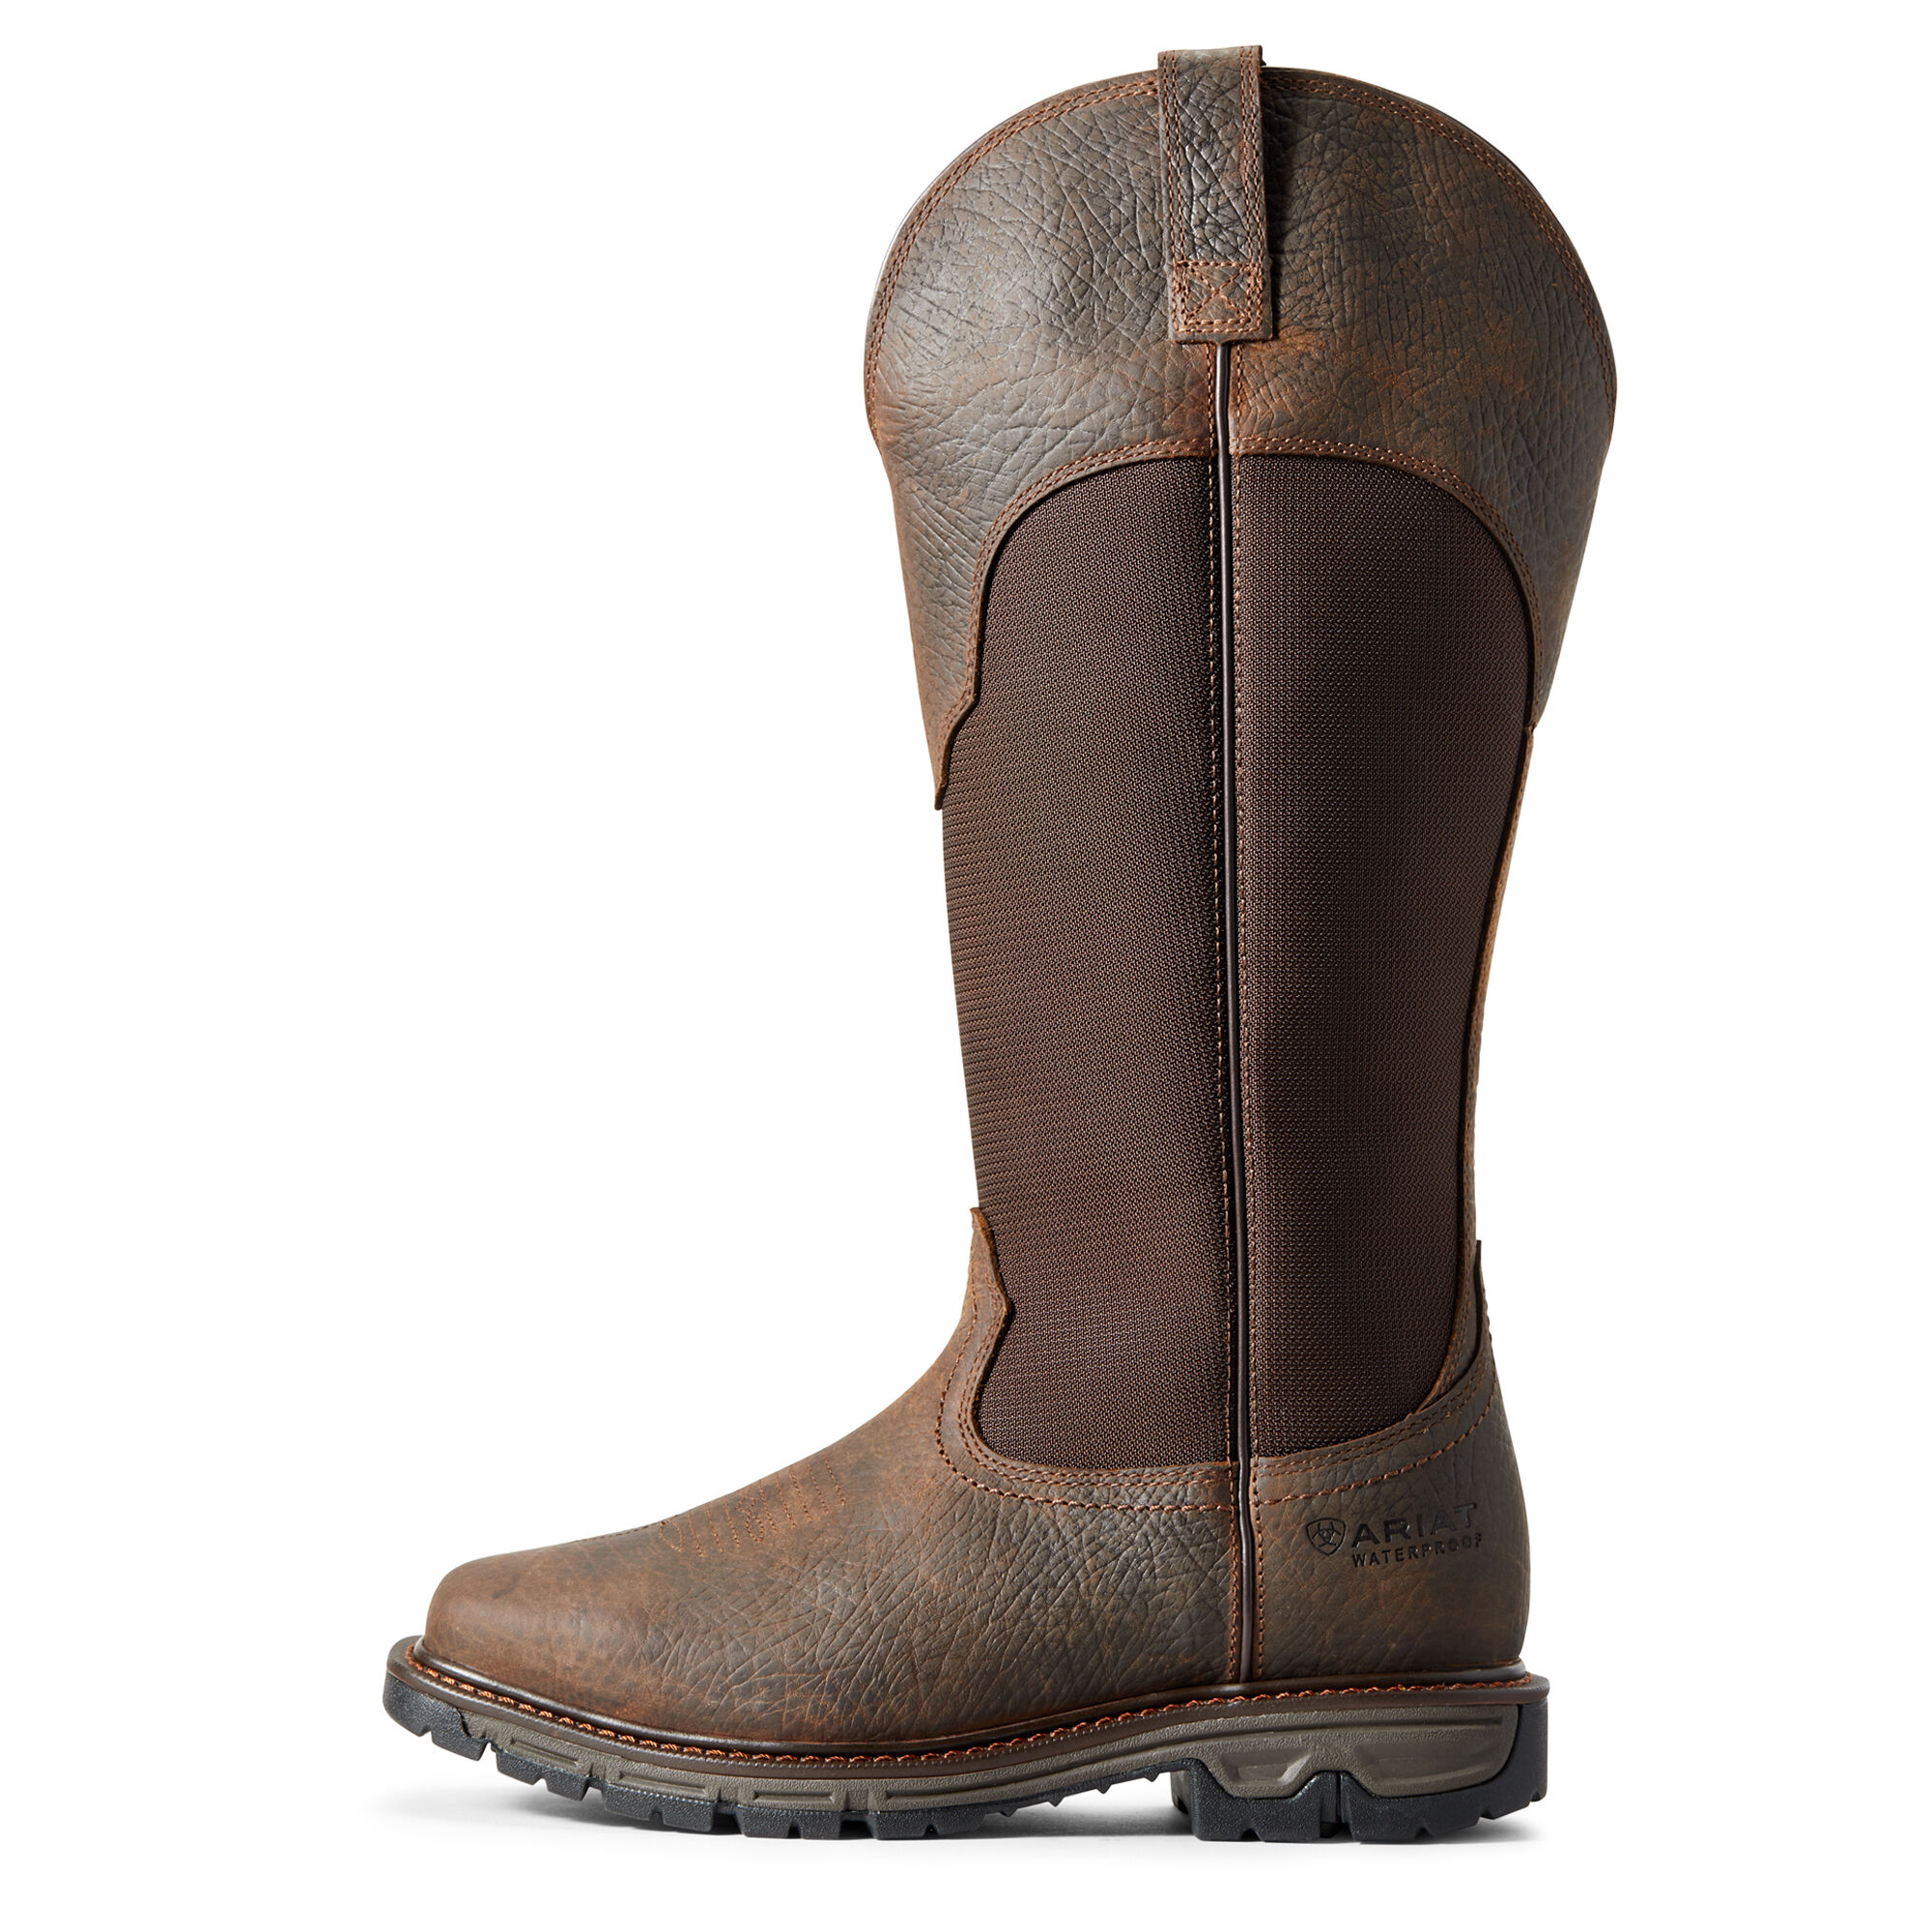 Conquest Snakeboot Waterproof Hunting 